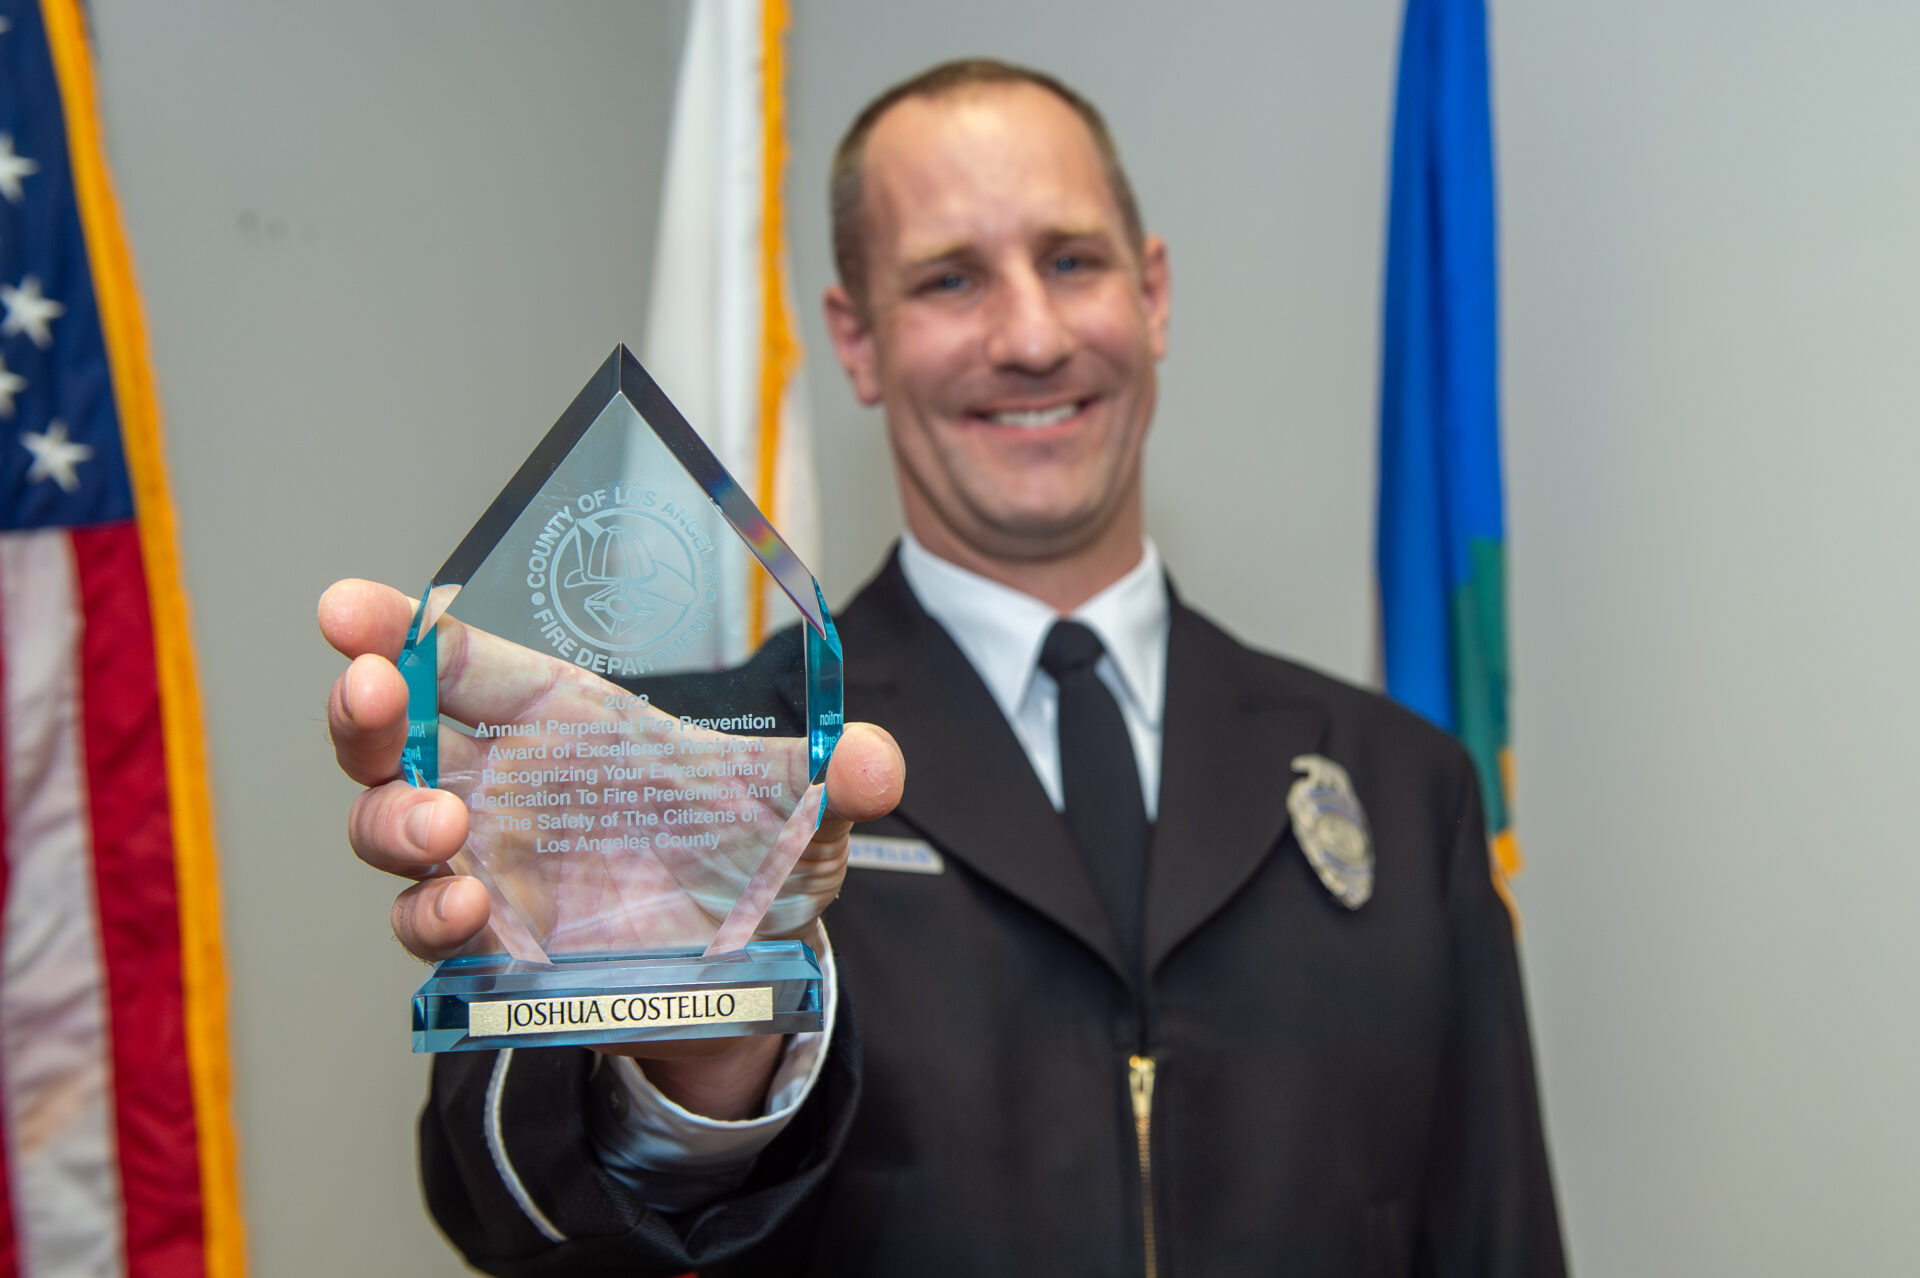 On Thursday, October 12, 2023, County of Los Angeles Fire Department (LACoFD) Fire Fighter Specialist Joshua Costello was honored as the 31st Perpetual Fire Prevention Award of Excellence recipient. This recognition also coincided with the County’s declaration of October as Fire Prevention Month.